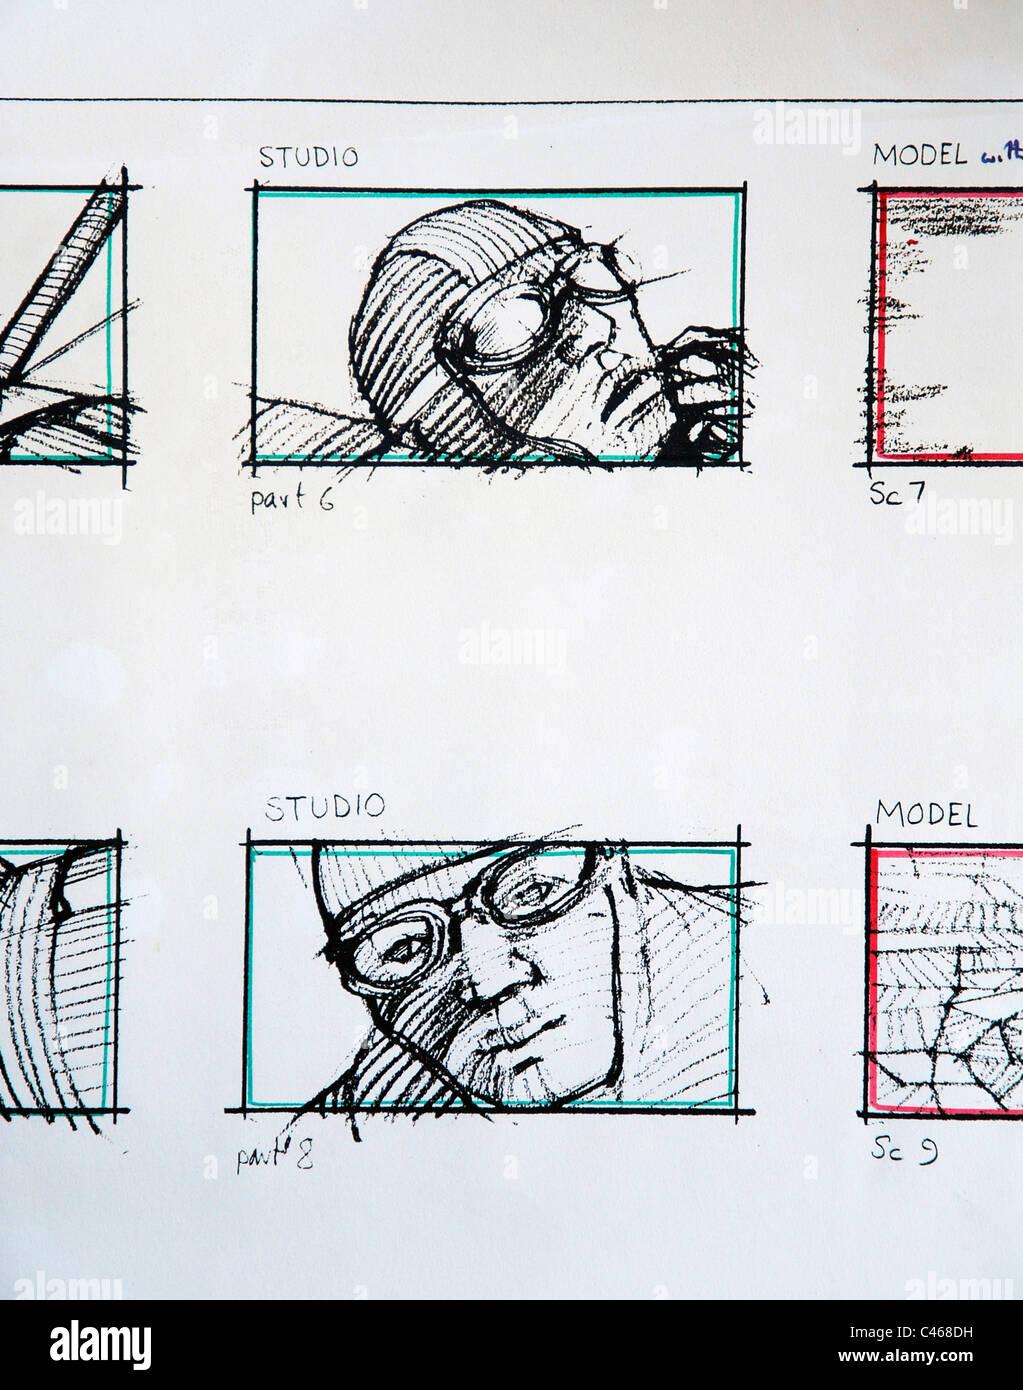 Storyboard from the 1969 film about Biggles. After initial filming, the project was abandoned and the film never made. Stock Photo